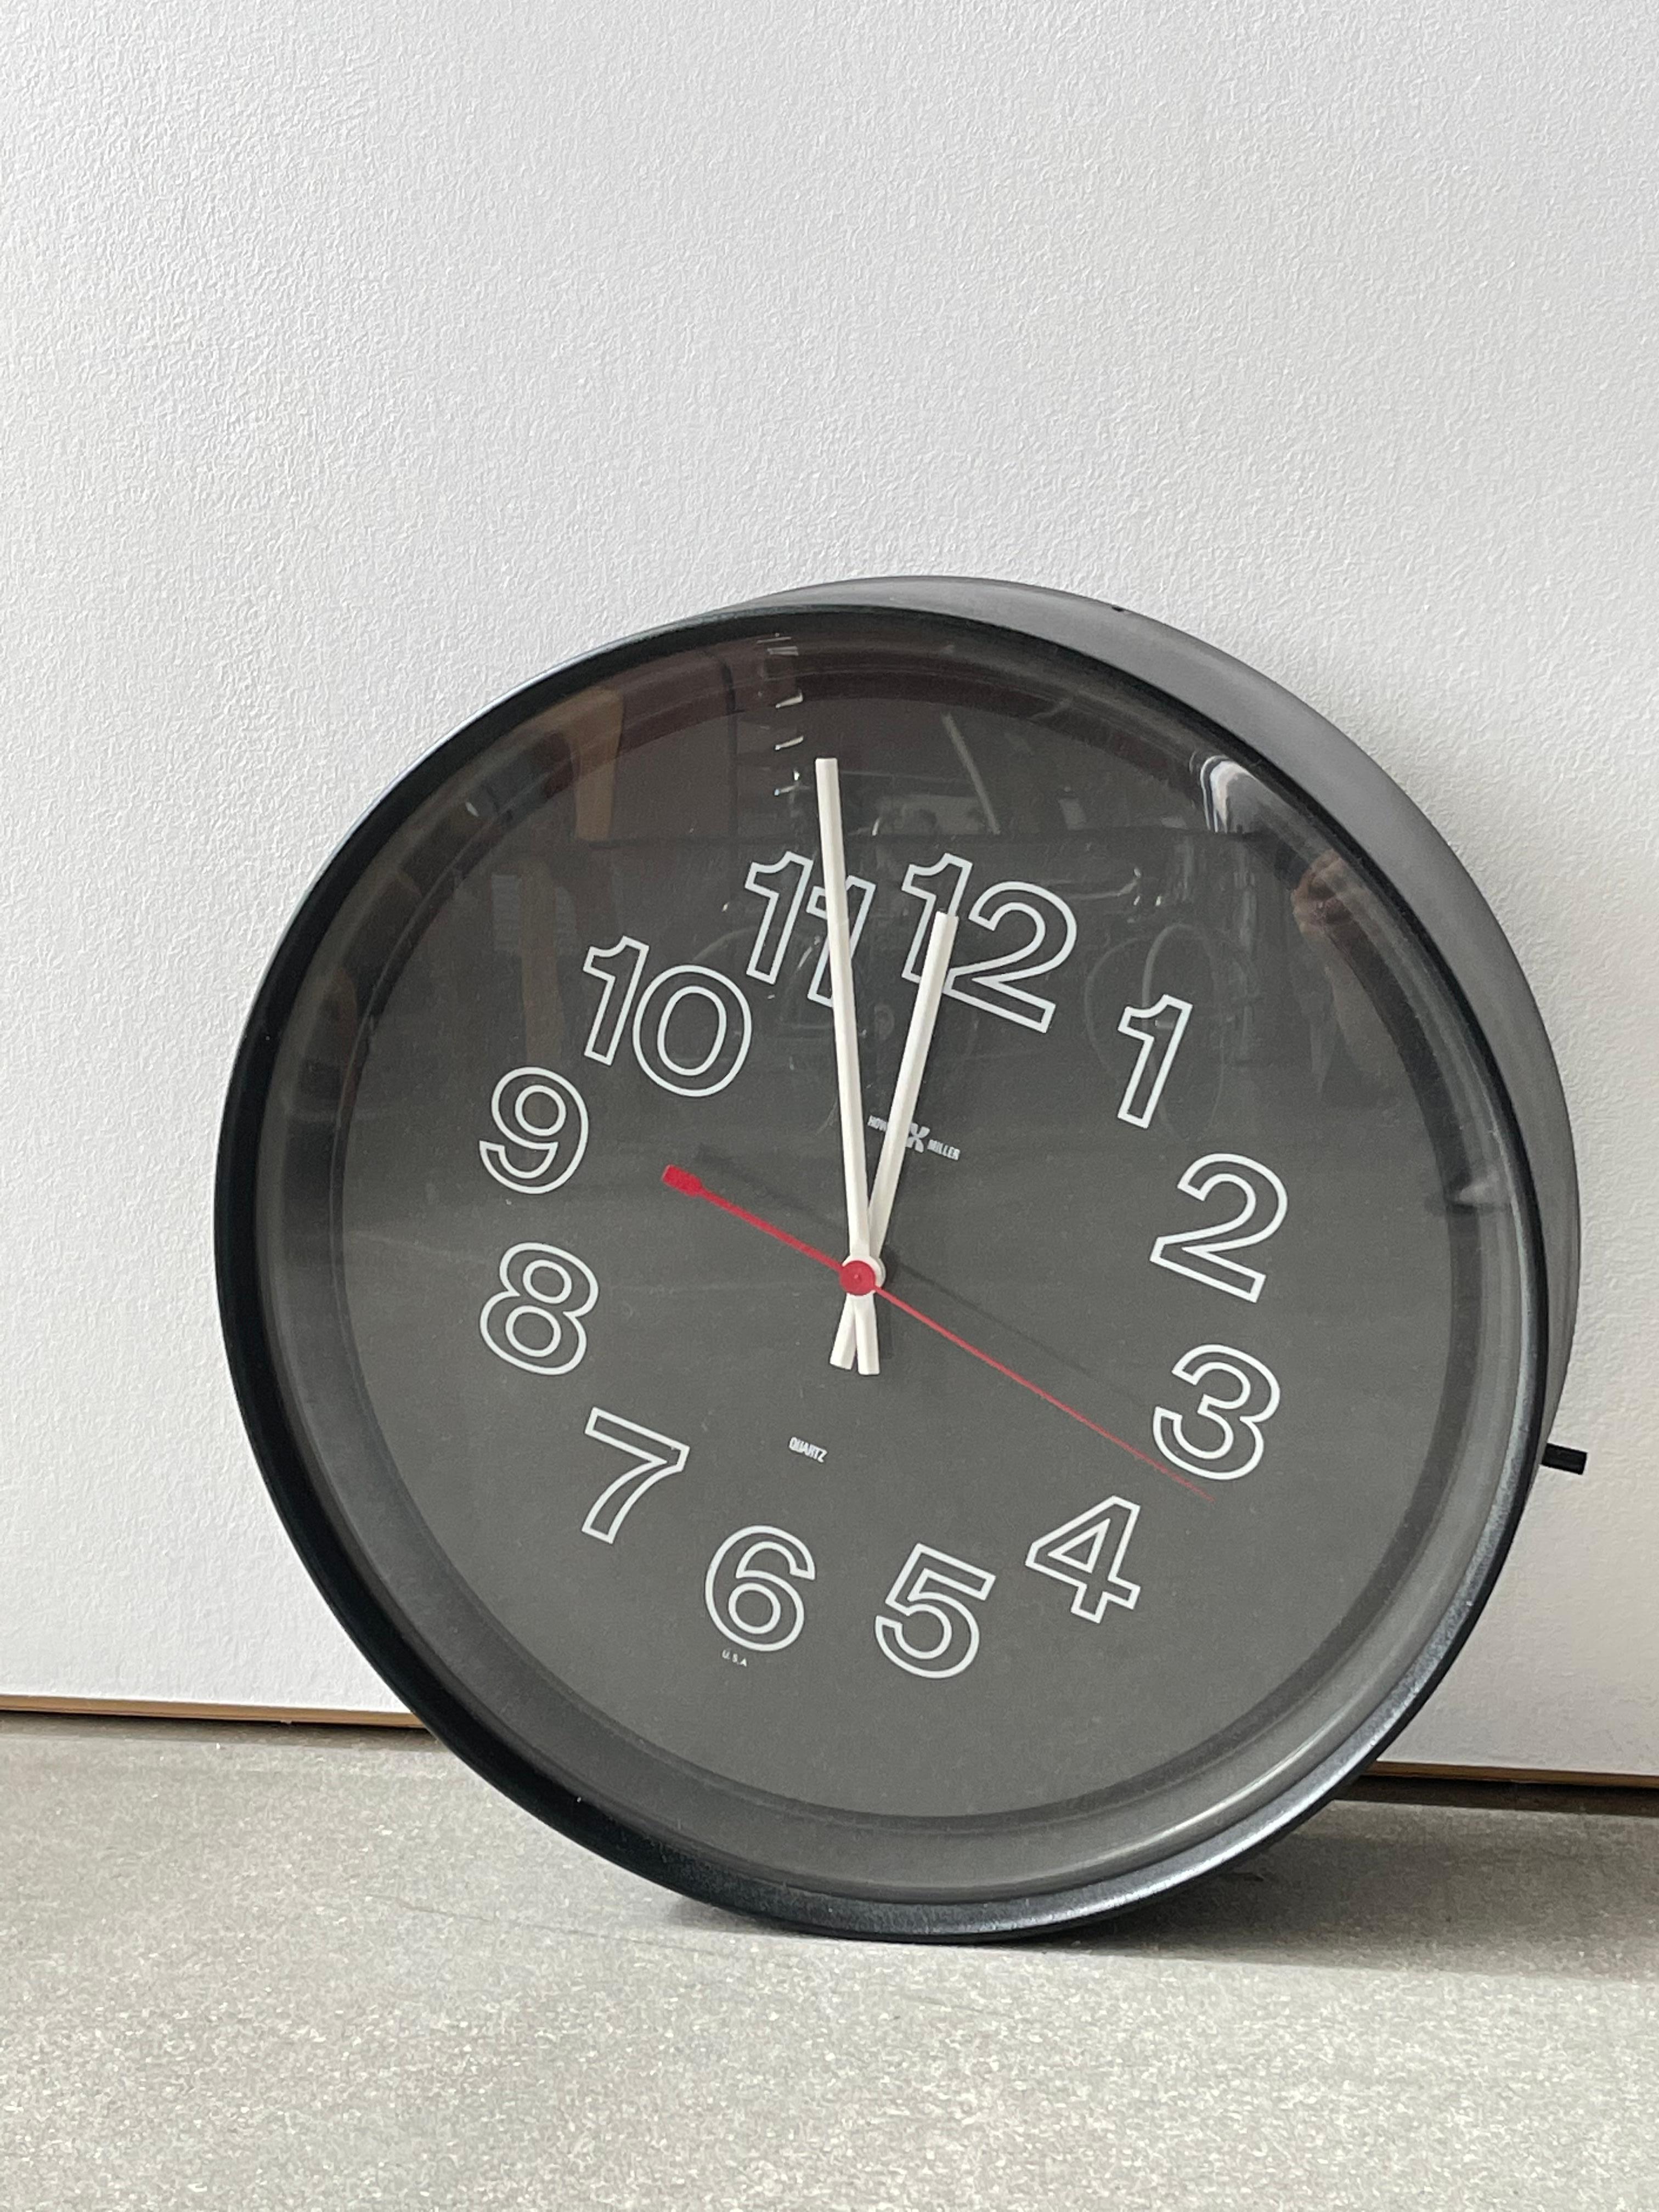 20th Century Large George Nelson & Associates for Howard Miller Clock Co. wall clock, model 629-035 Zeeland, Michigan, 1970s enameled steel body with a glass lens. Perfect for hanging or displaying upright. Works perfectly with continuous arms